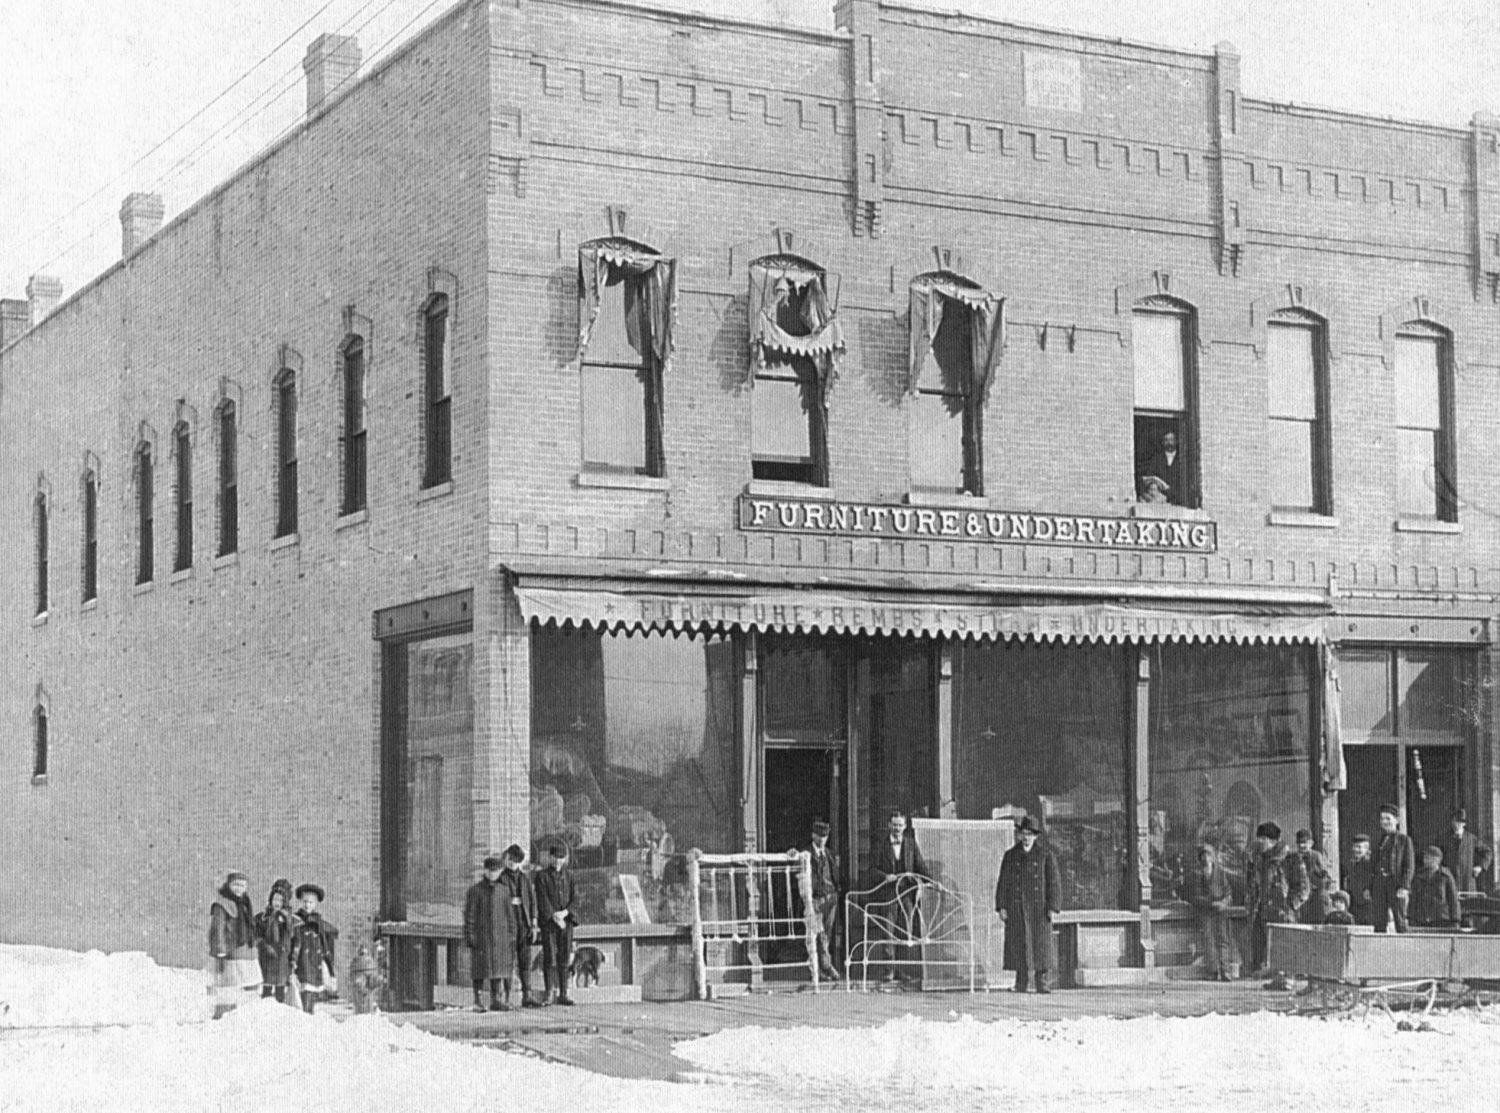 Jacob Sturm and Louis Rembs began their partnership in the late 1800s when they purchased the building now located at 301 S. Central Ave.